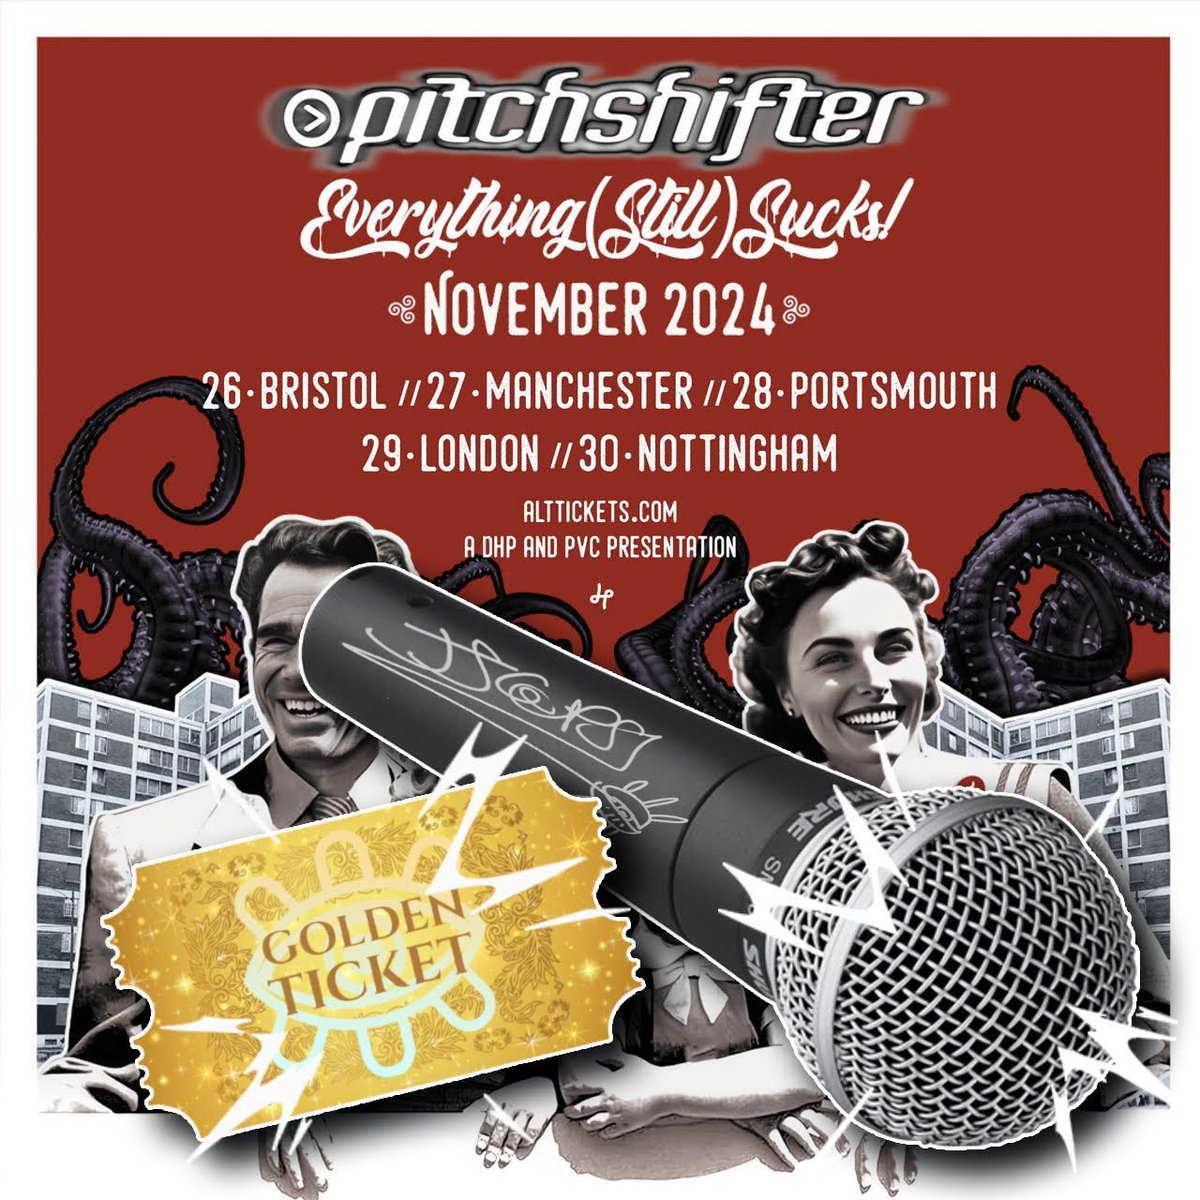 Congrats to Luke G for winning the Pitchshifter Golden Ticket for our @DHPFamily gig at @thisisgorilla! Luke'll get awesome prizes (like one of J.S.'s personal microphones, signed, and an awesome meet-the-band opportunity)! See you down the front! buff.ly/3T1hTAg